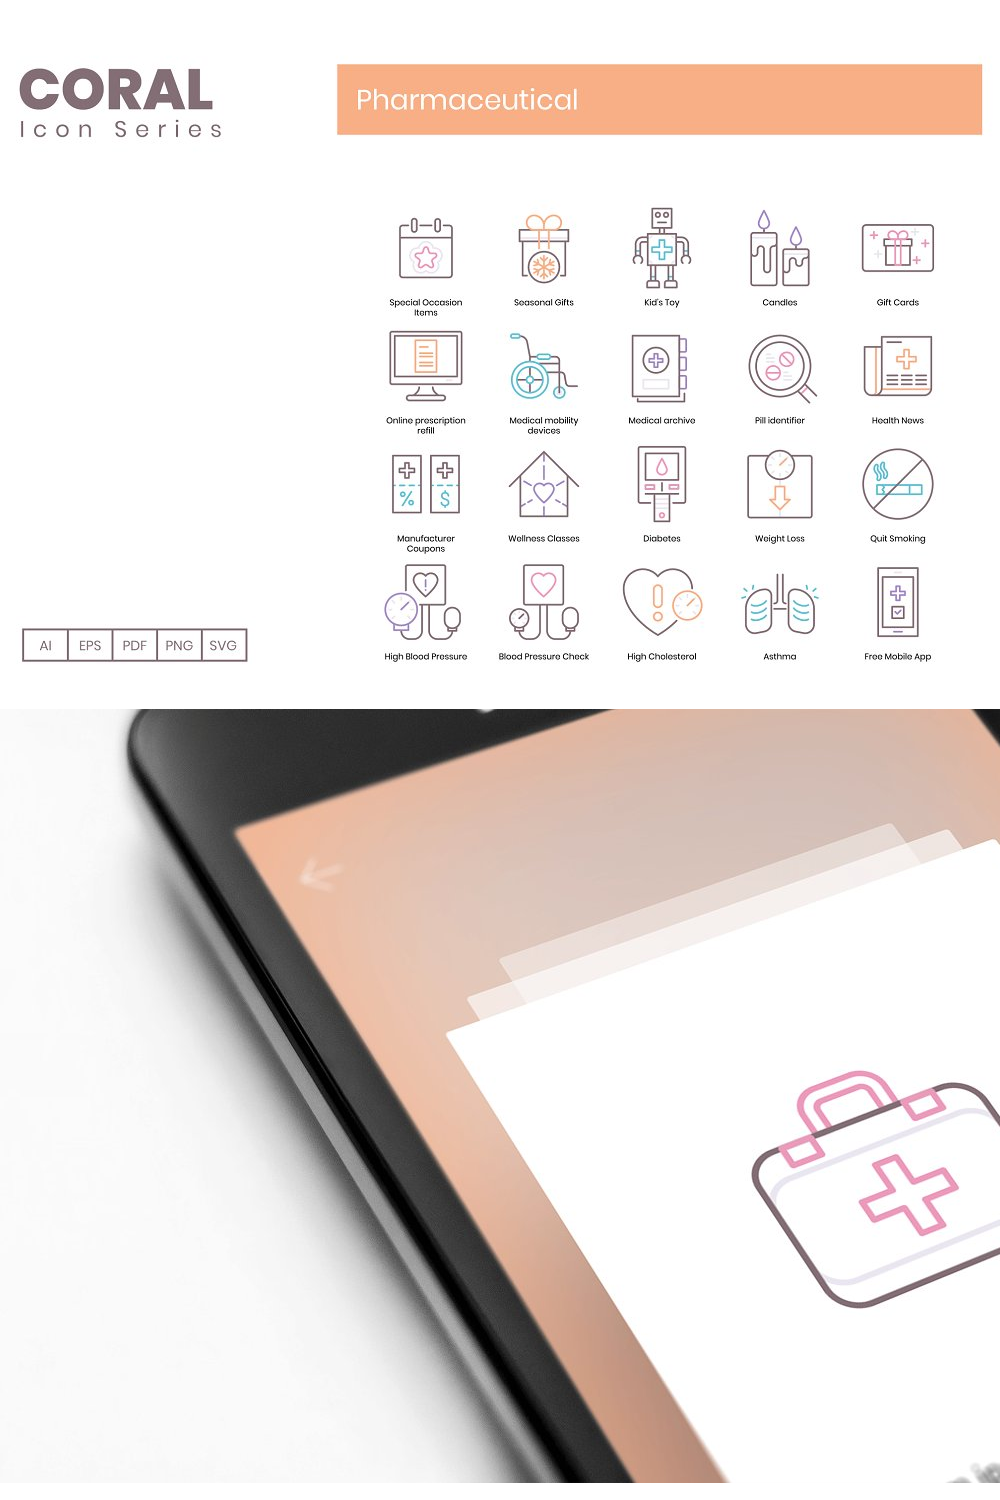 Illustrations 85 pharmaceutical icons coral of pinterest.